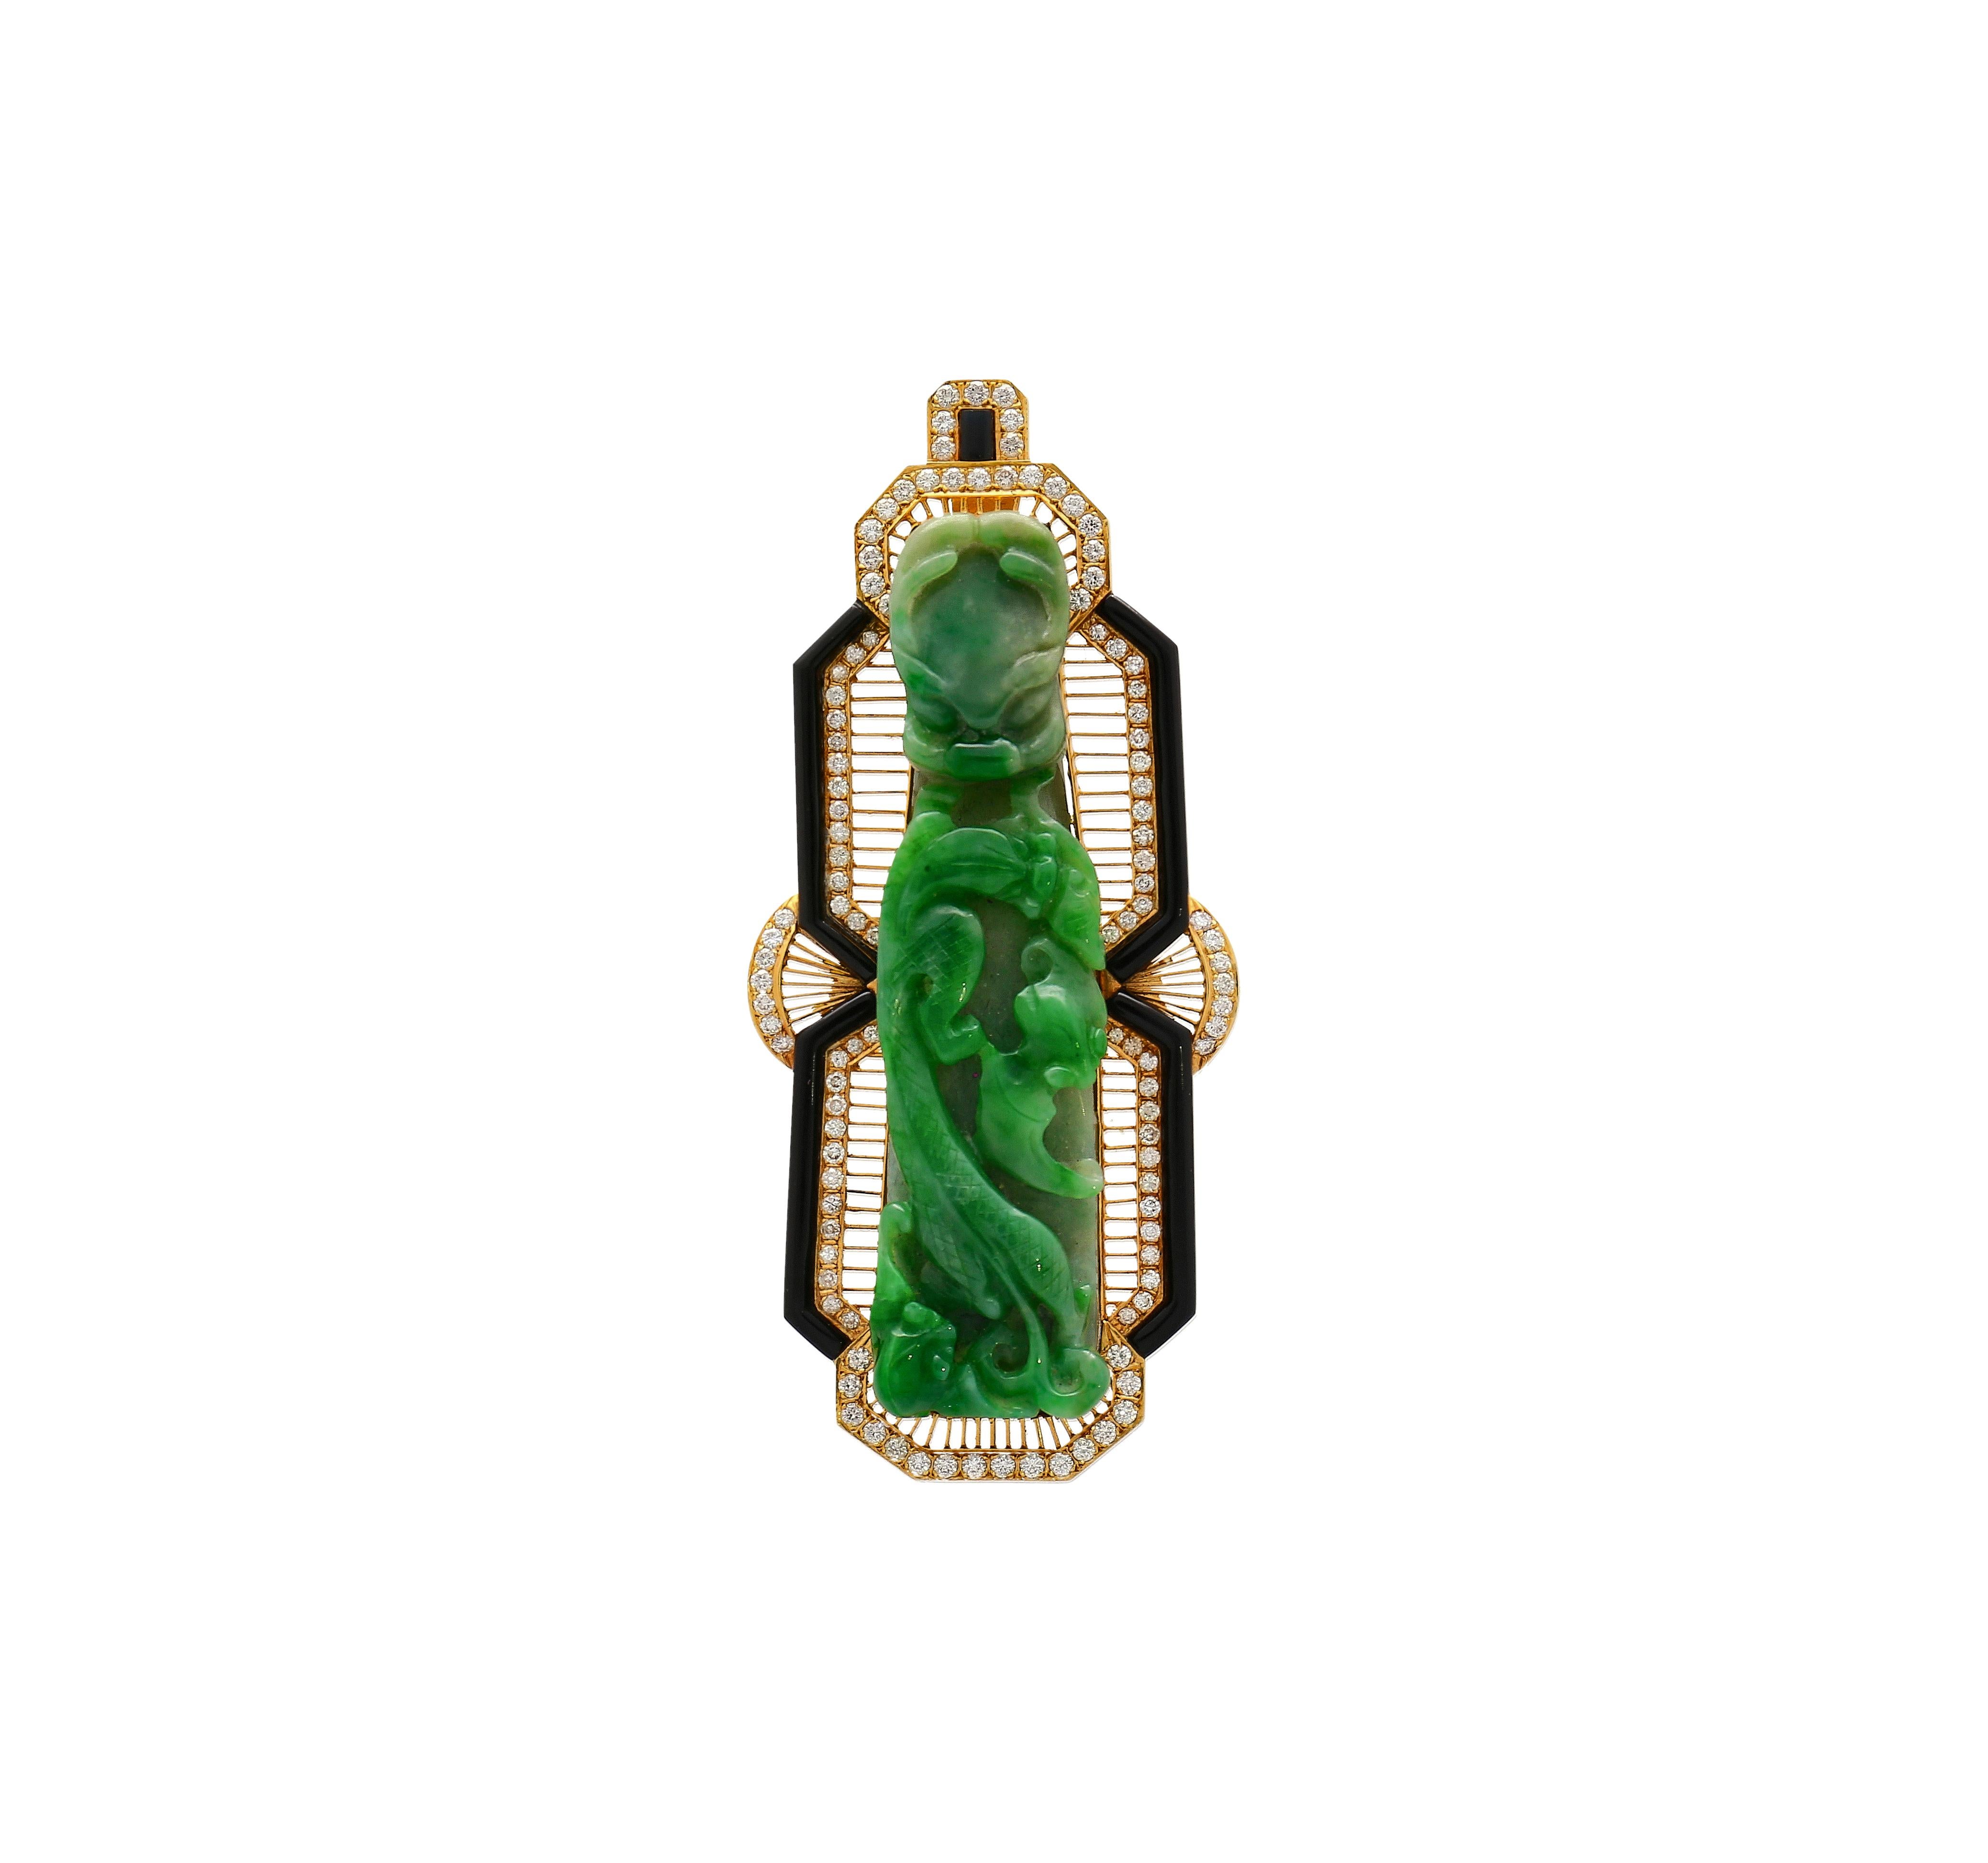 This piece is a magnificent antique relic with incredible origins. The jadeite jade is known as Type A with no resin enhancements. Made with a hand-carved 